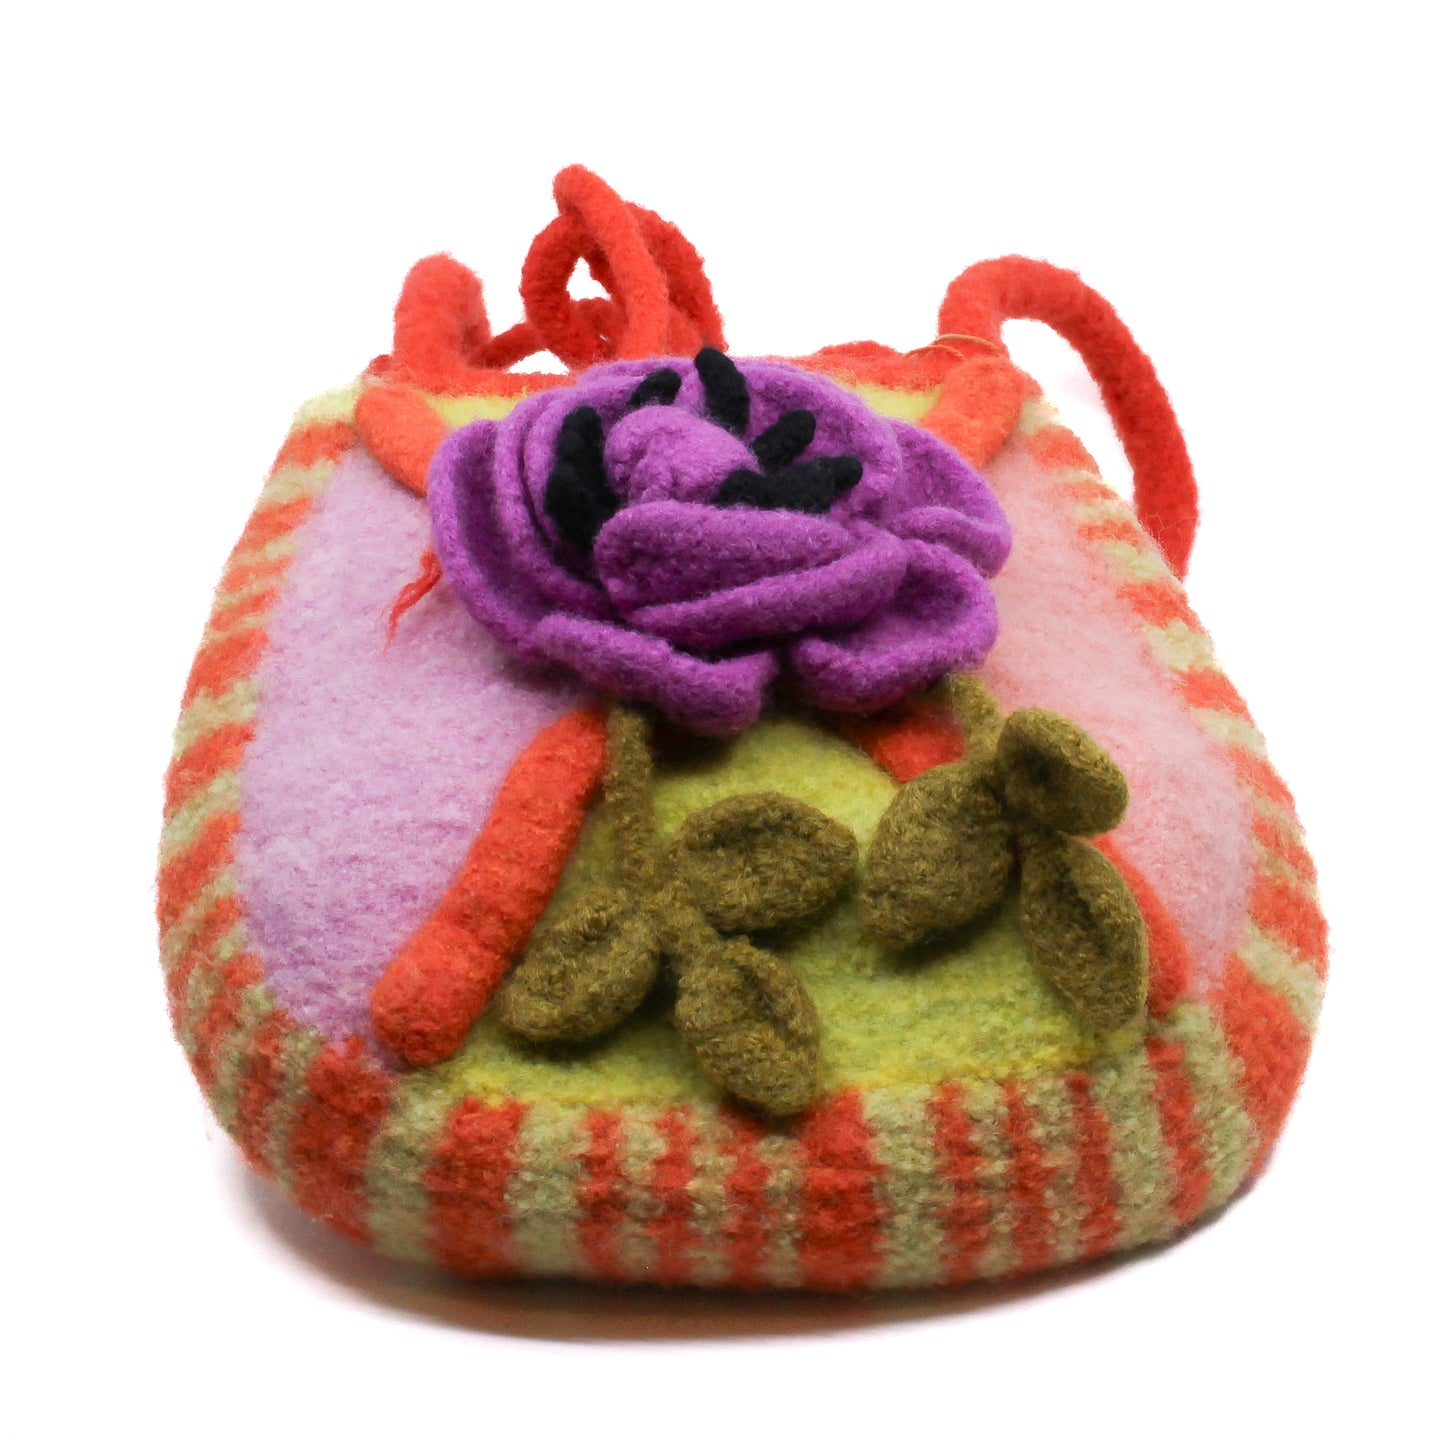 Orange, pink, and yellow felted bag with large rose